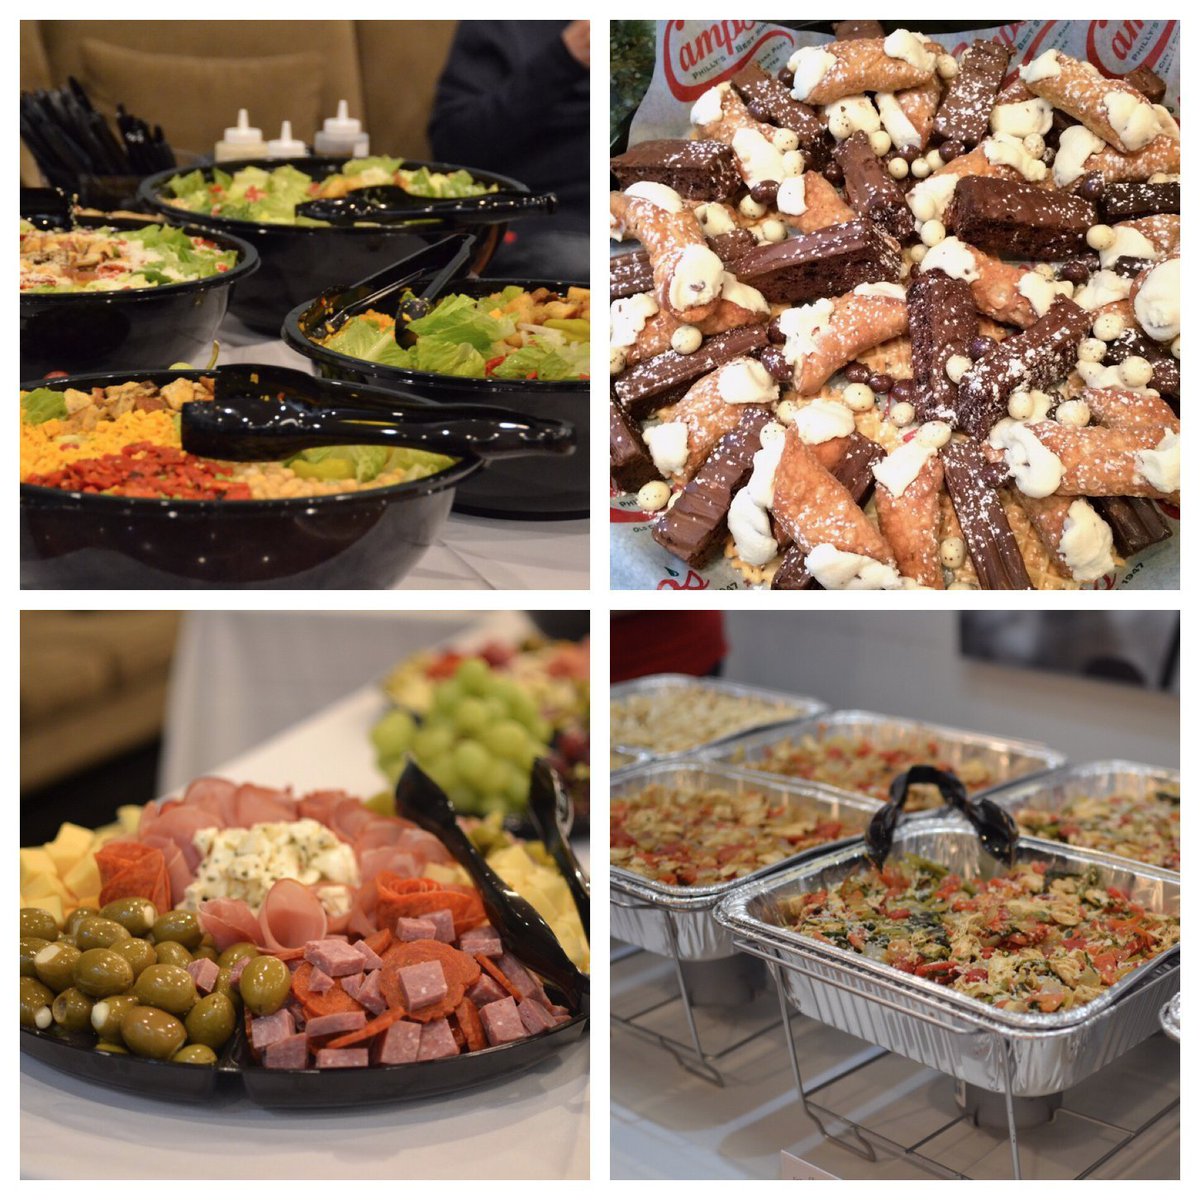 Campos offers great catering services! We want to provide you with an assortment of our favorite foods for any event or gathering. Don't miss out on this service, and allow us to bring the magic of Campos to you! Order from our website for $25 off!! camposdeli.com/catering/